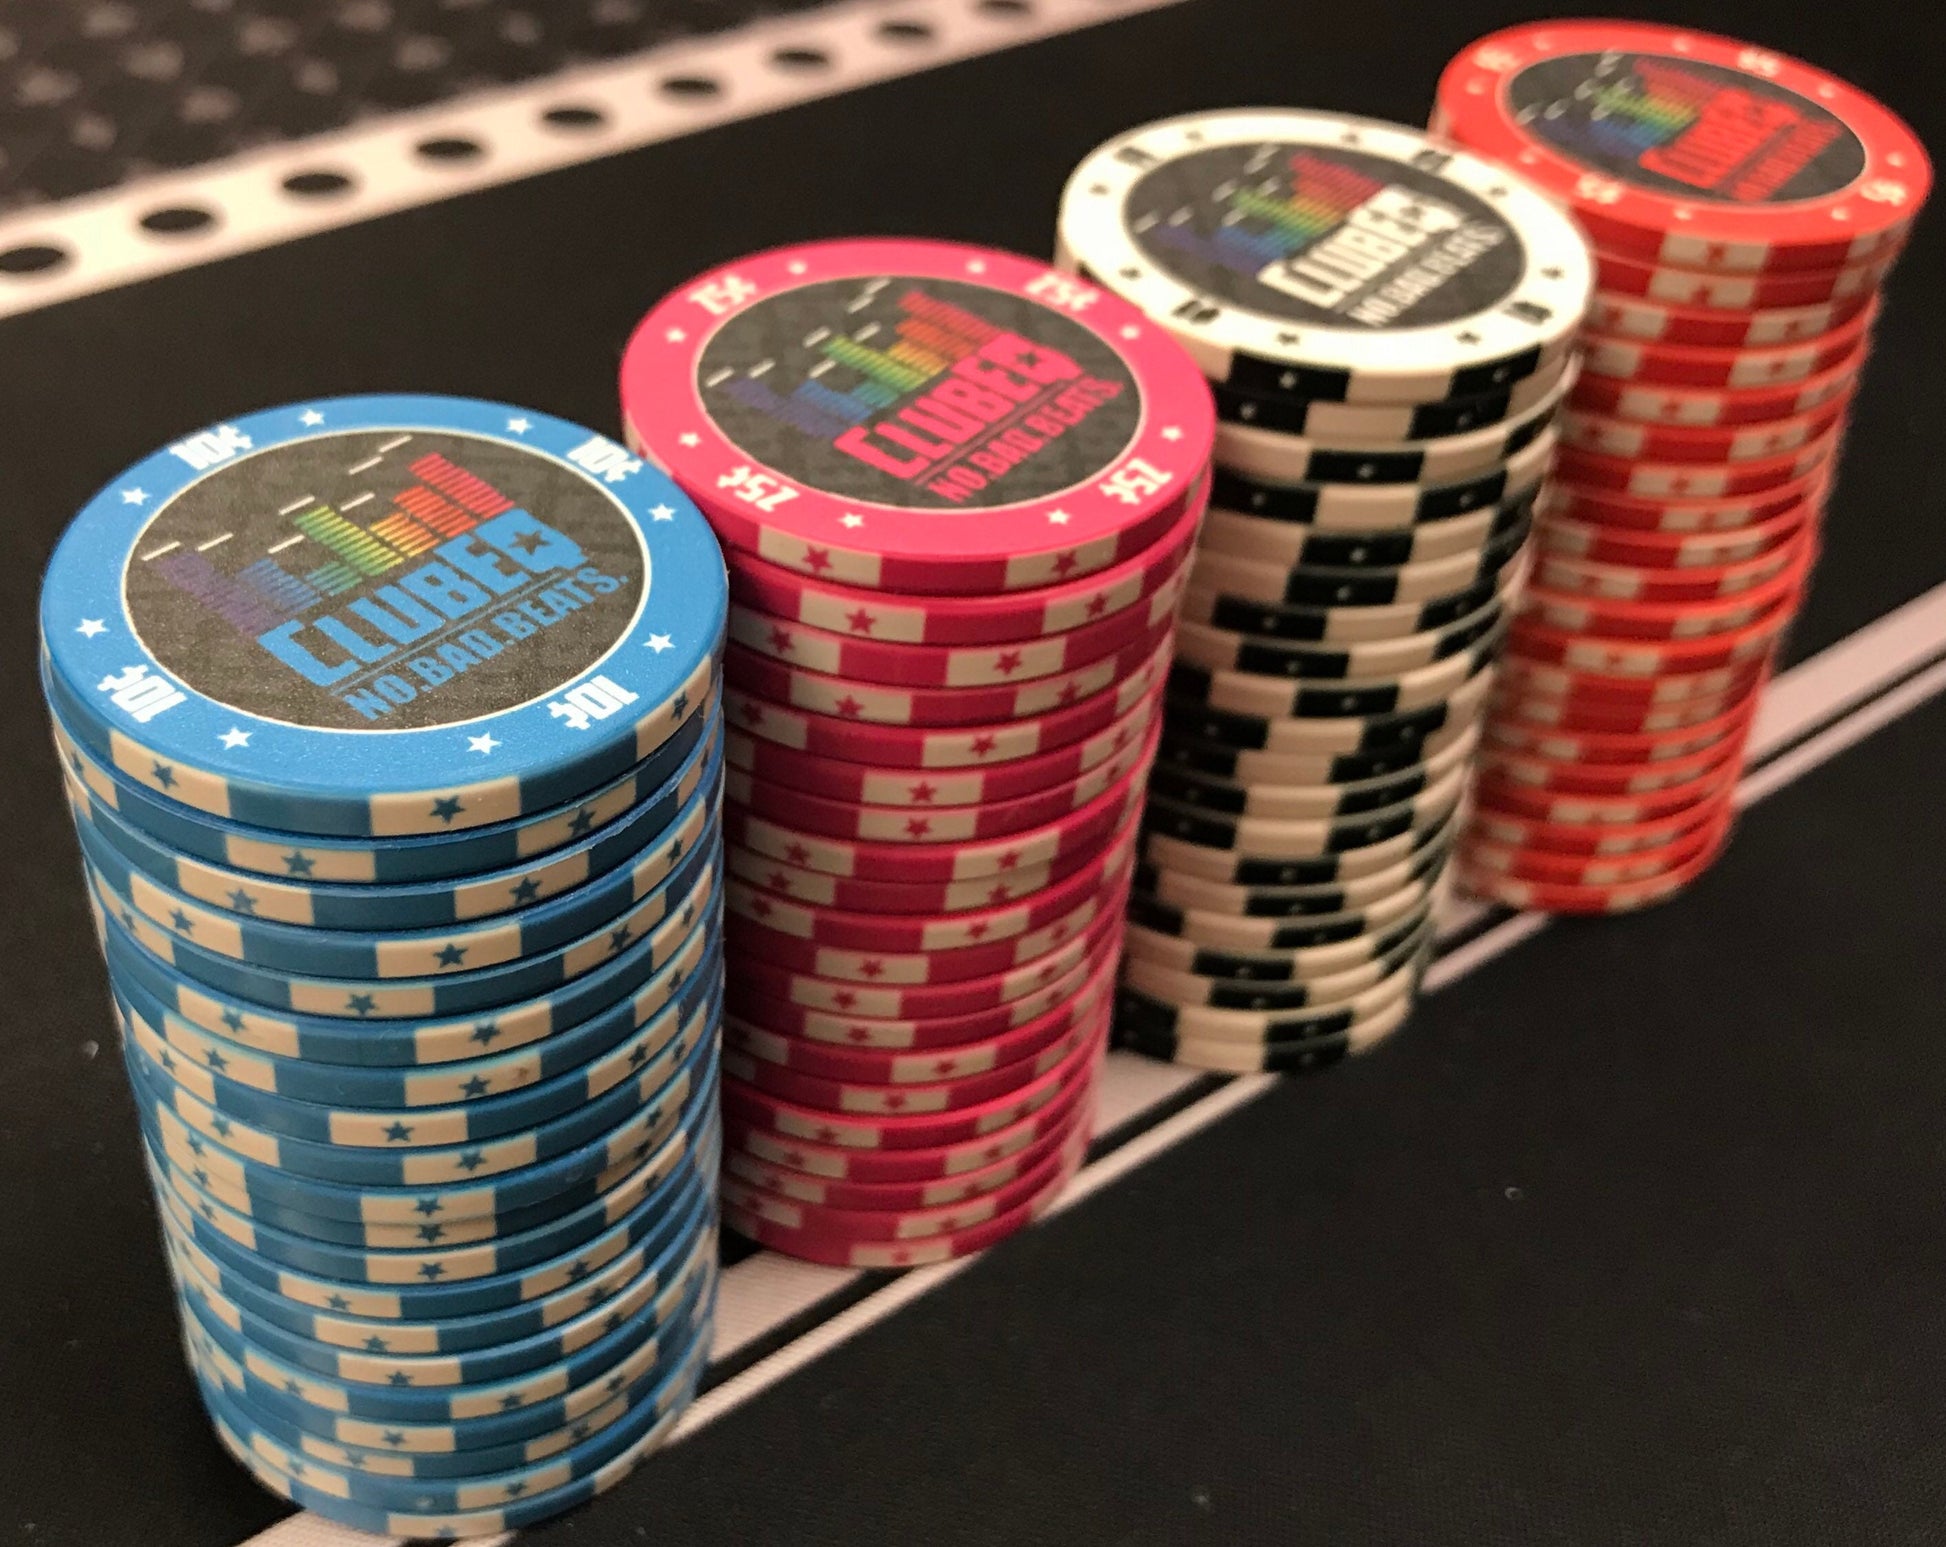 Four stacks of 20 ClubEQ designer poker chips. The ClubEQ blue 10¢, pink 25¢, white $1, and red $5 chips. (Ten cent, twenty-five cent, one dollar, five dollar.) If you're looking for unique poker chips, these are the answer.